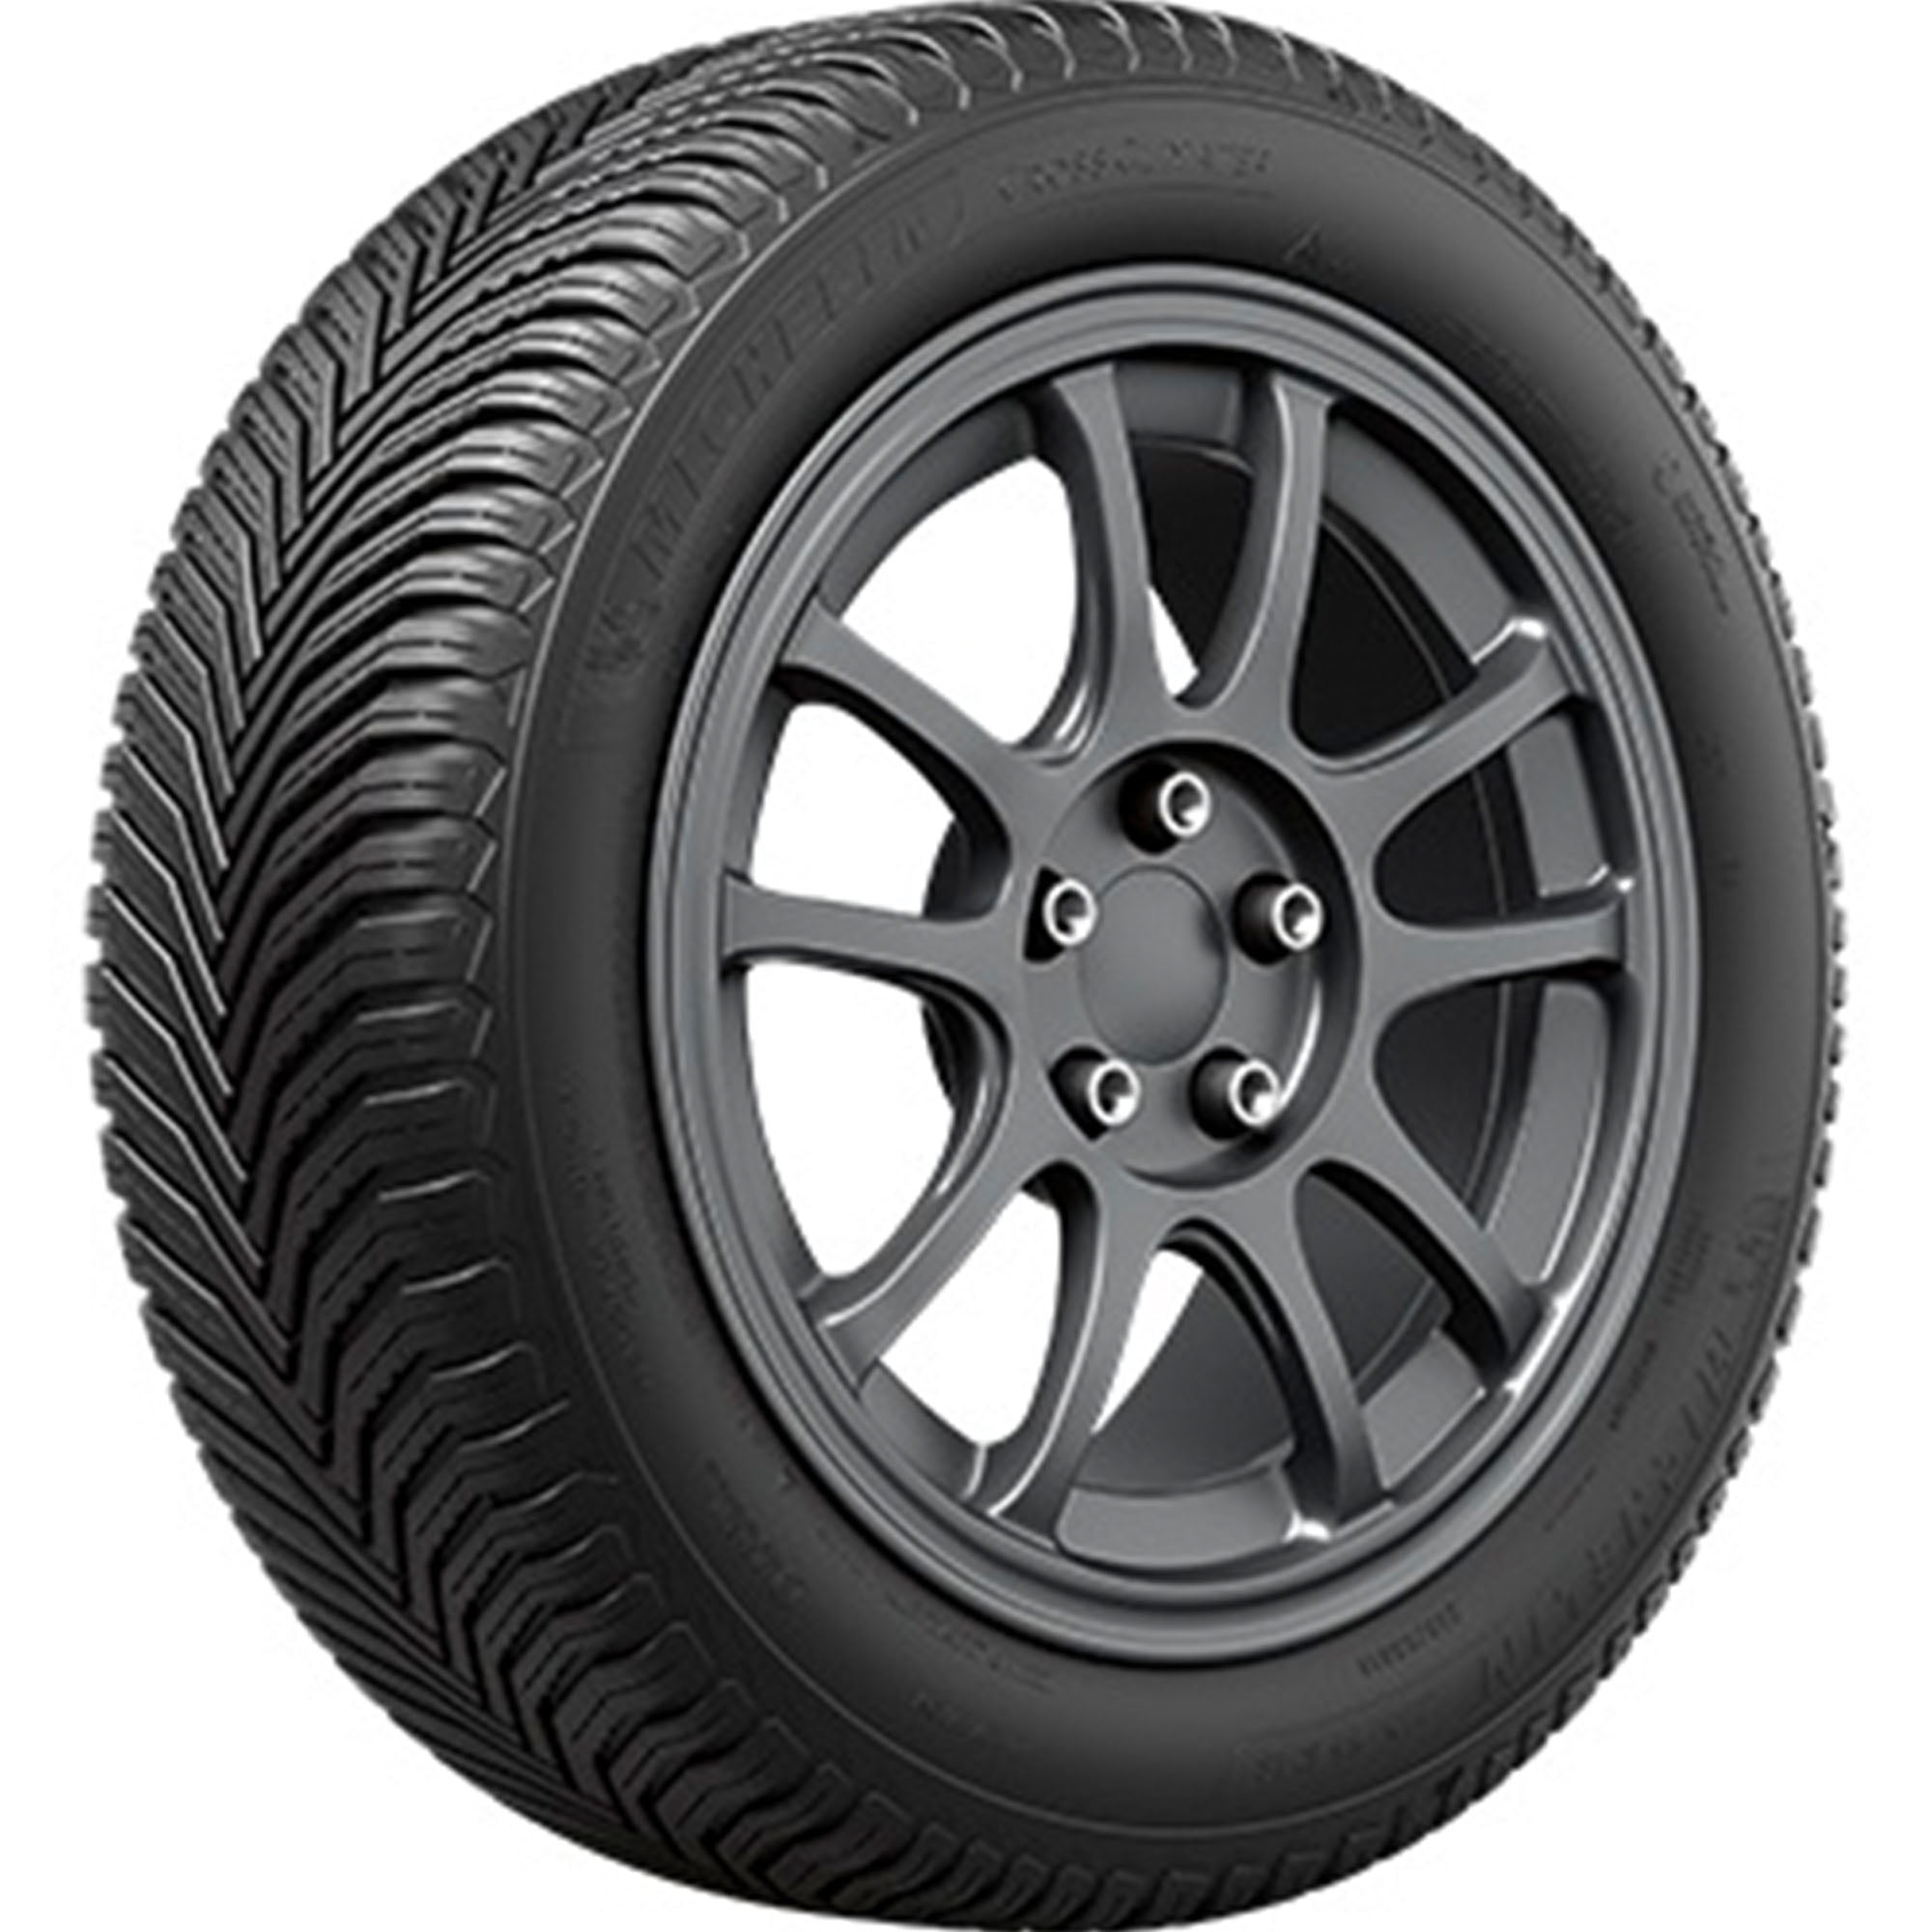 Michelin Cross Climate2 A/W All Weather 235/55R20 102H SUV/Crossover Tire